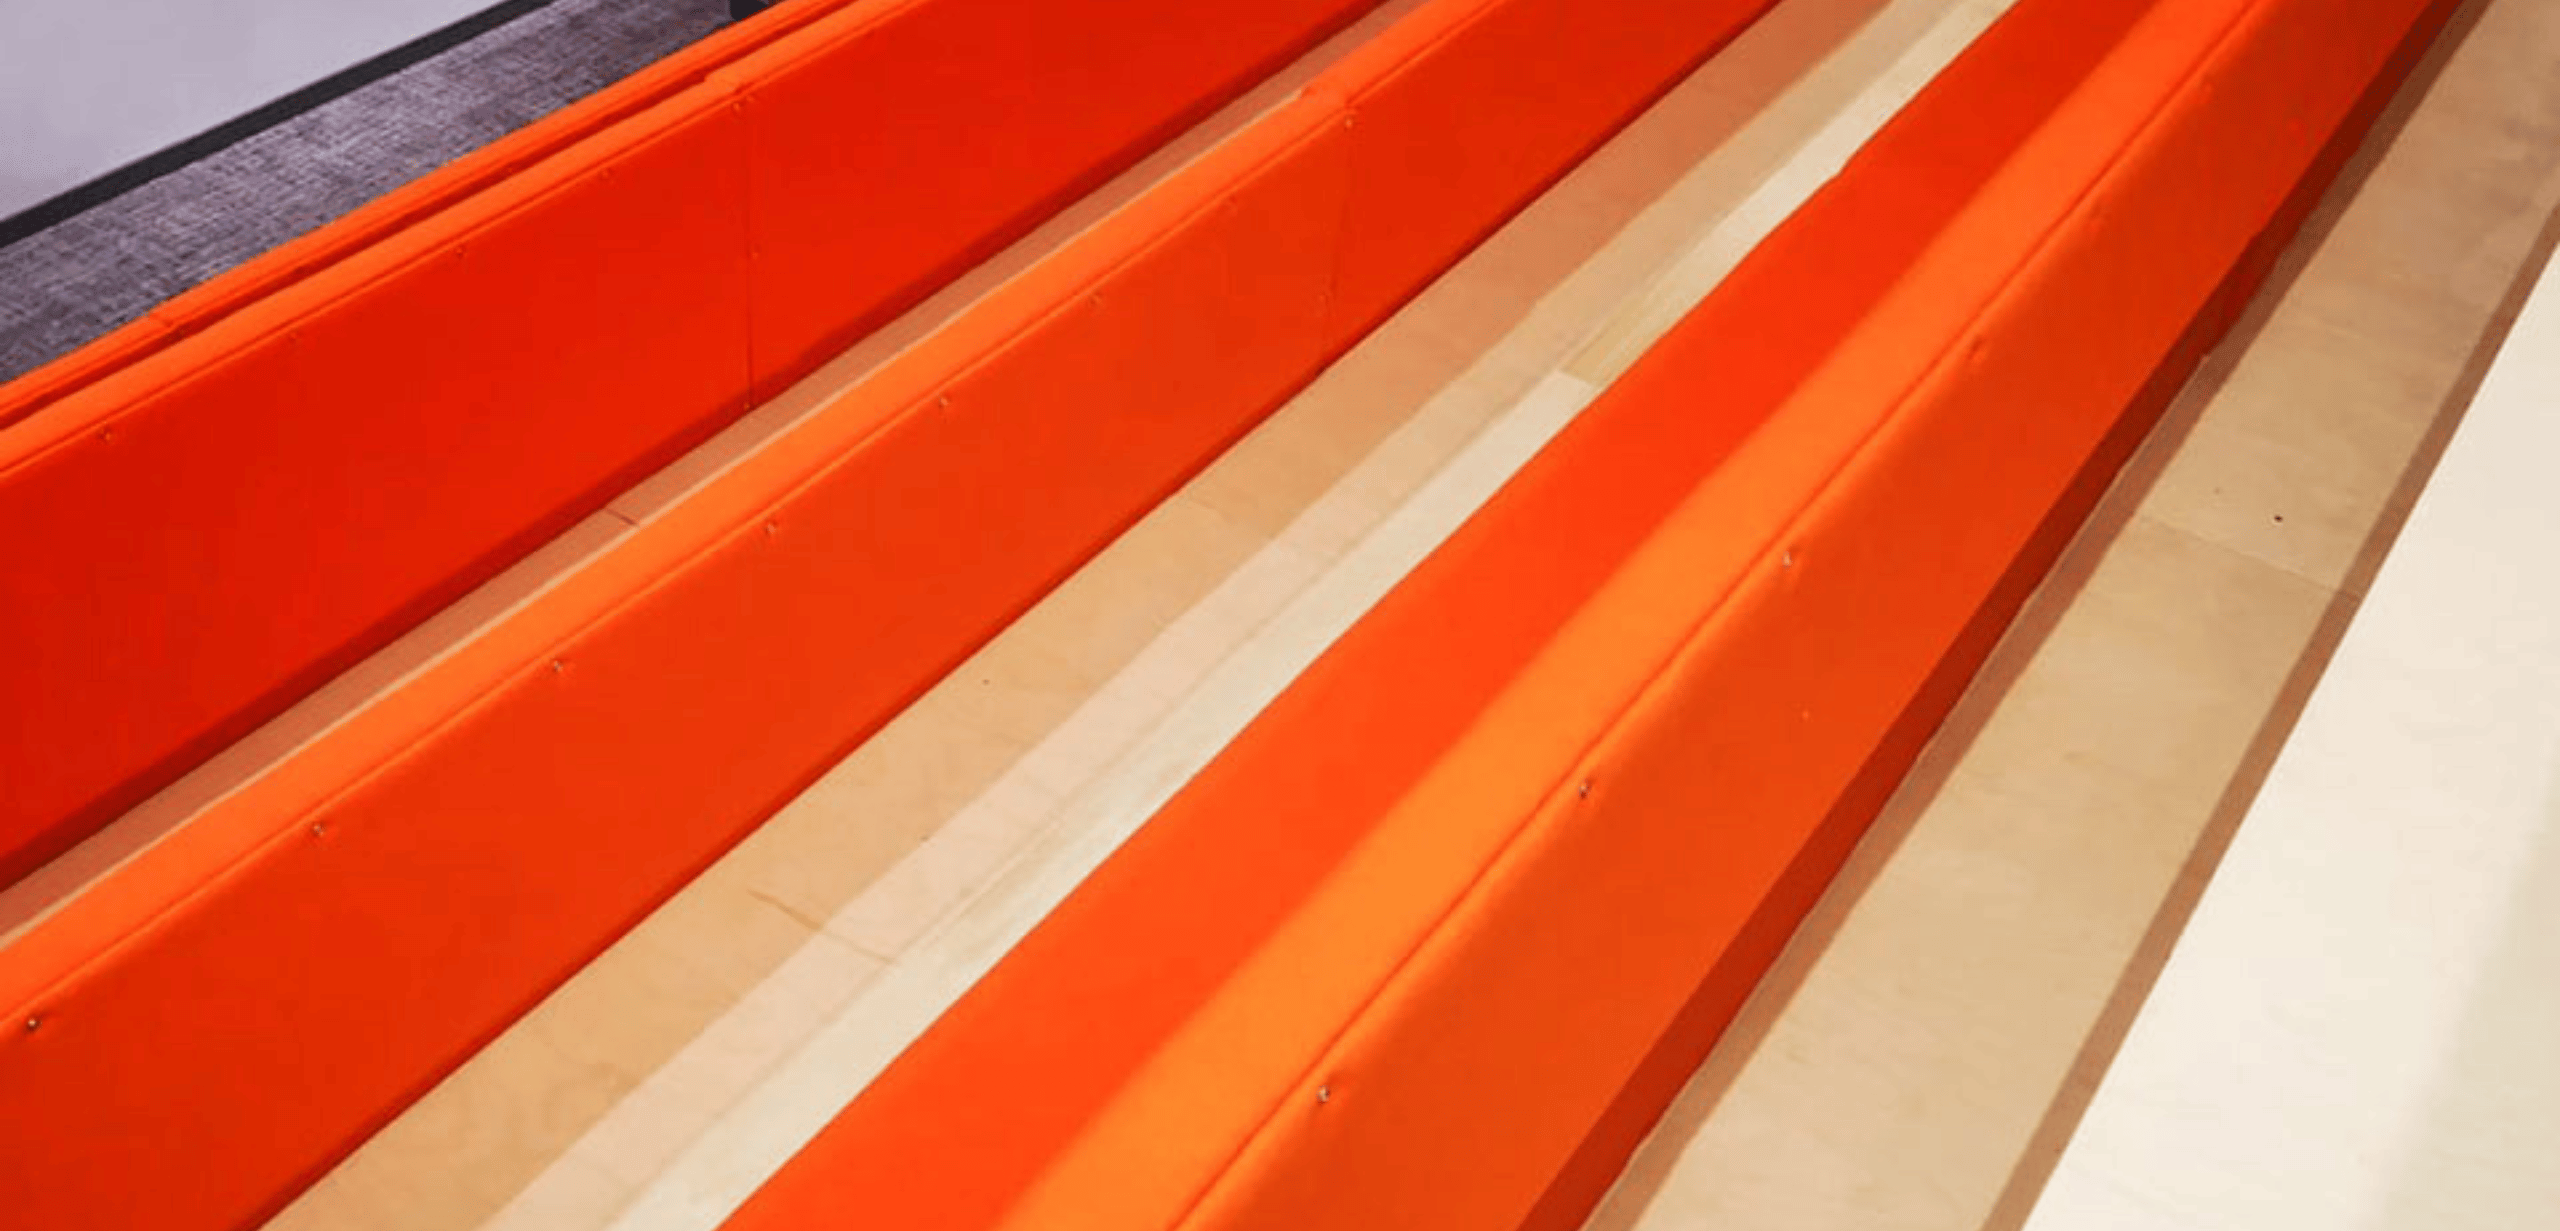 A row of orange tiered seating in a stadium.